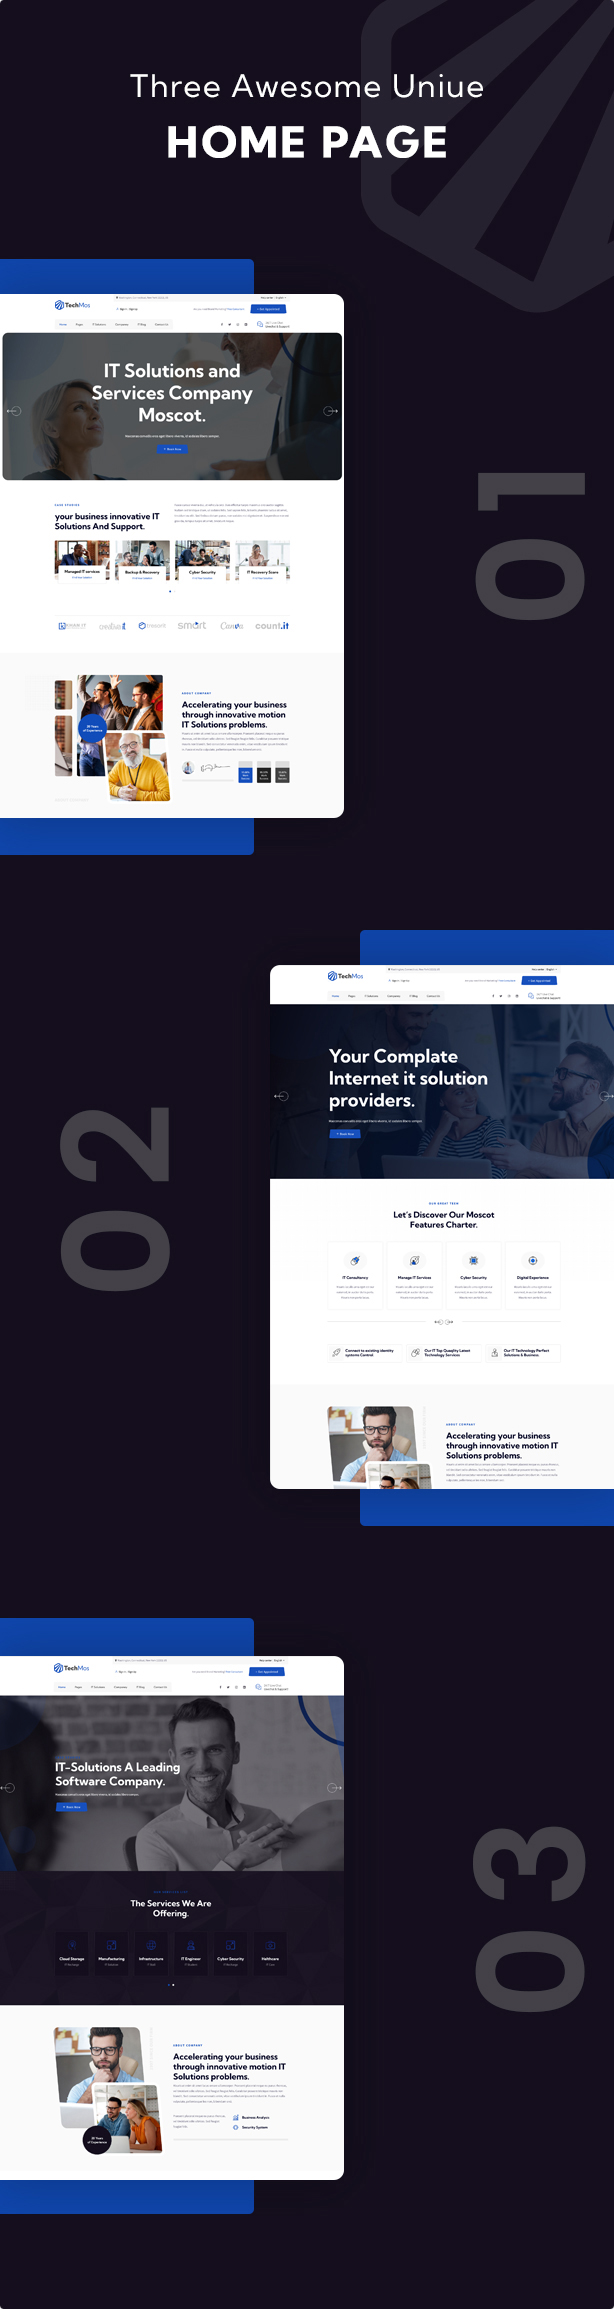 IT Solutions & Services Company WordPress Theme - 2